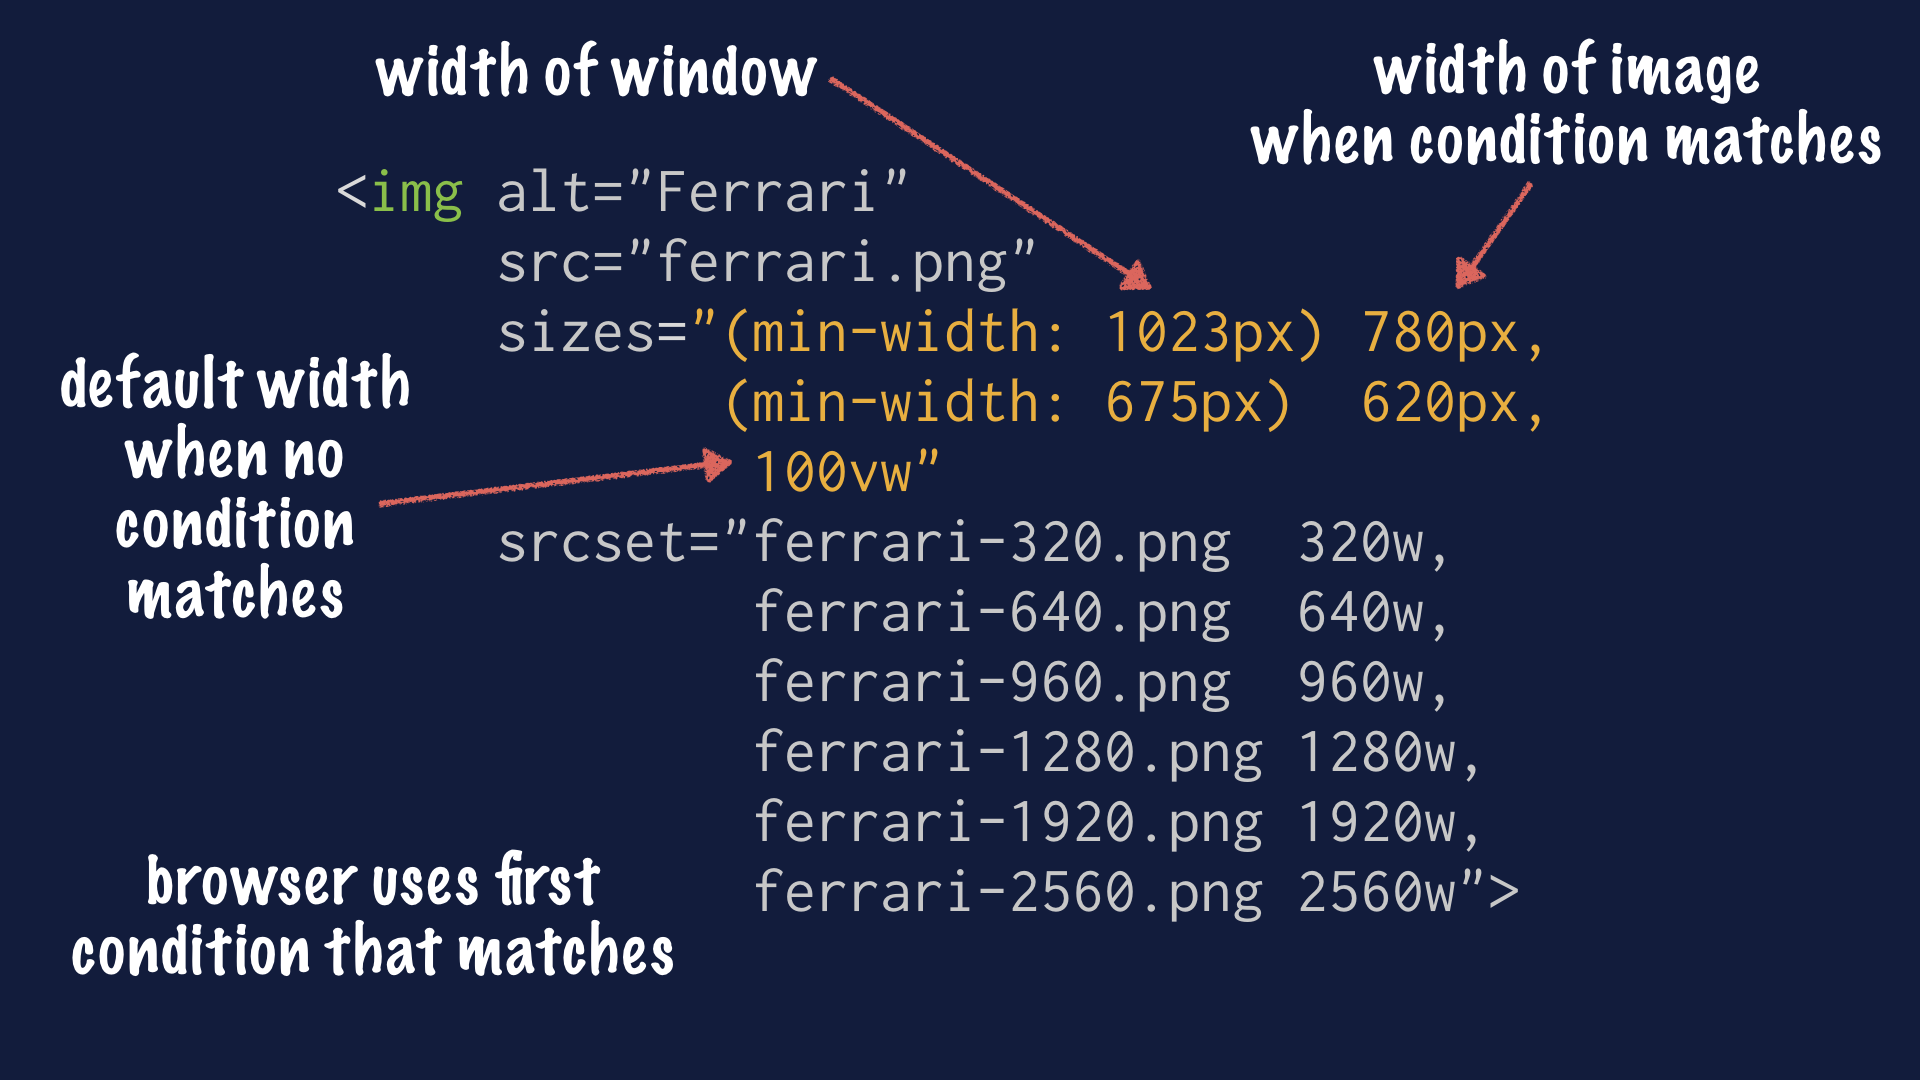 Labeled screenshot of responsive image code example, showing the sizes attribute, pointing out that it contains media queries describing the width of the window, and the width of the image when that condition matches. The last item has no media query and is the default width when no condition matches. The browser users the first condition that matches.